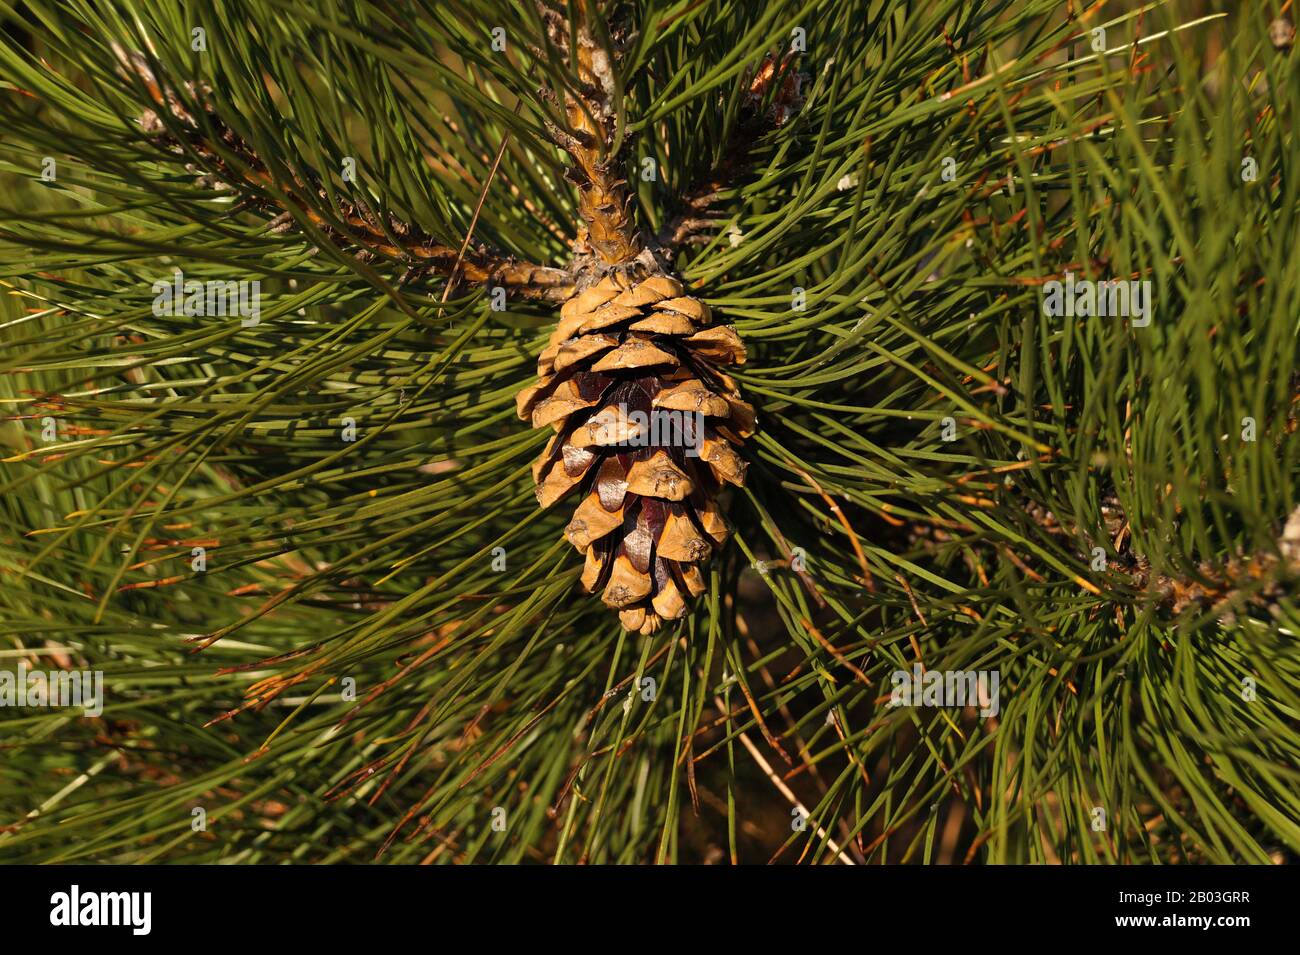 Pinus nigra, the Austrian pine or black pine, is an ideal type of tree for planting in cities in a polluted environment. Stock Photo